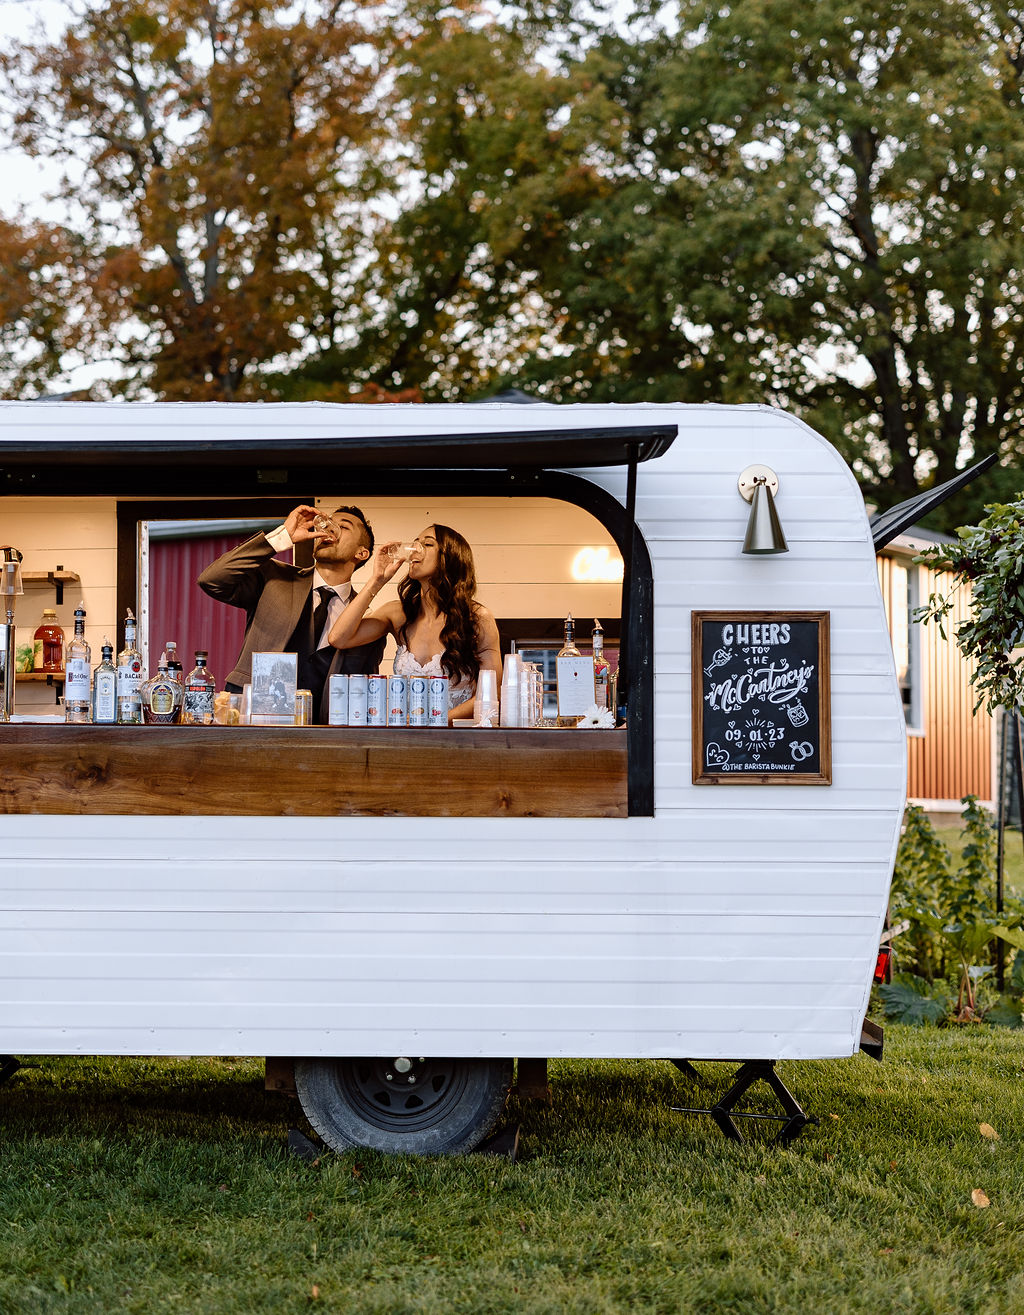 Mobile bar on the lawn